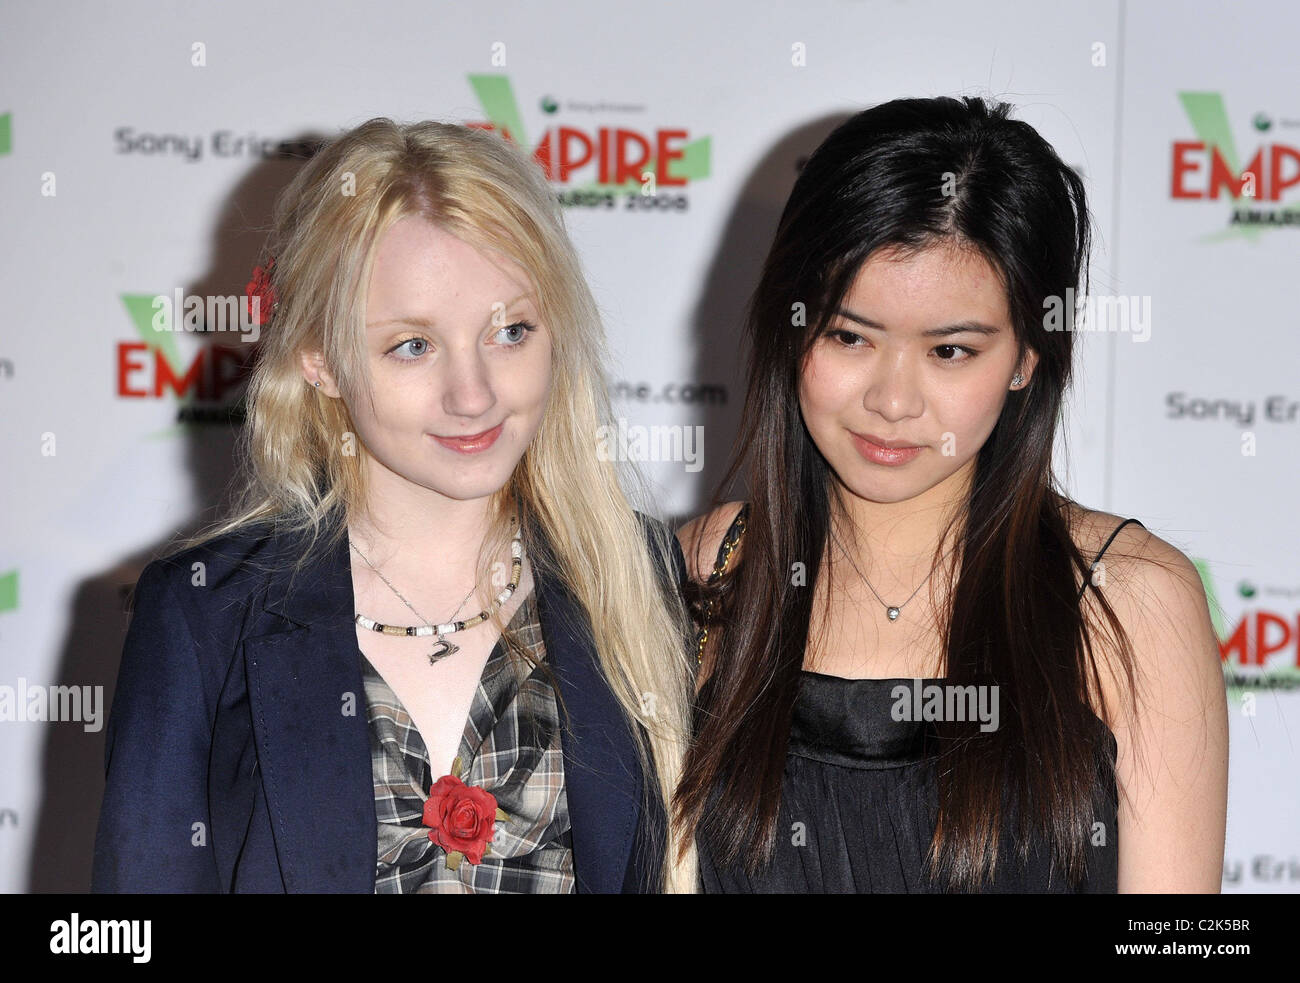 Katie Leung and Evanna Lynch Empire Awards held at the Grosvenor House London, England - 09.03.08  : Stock Photo